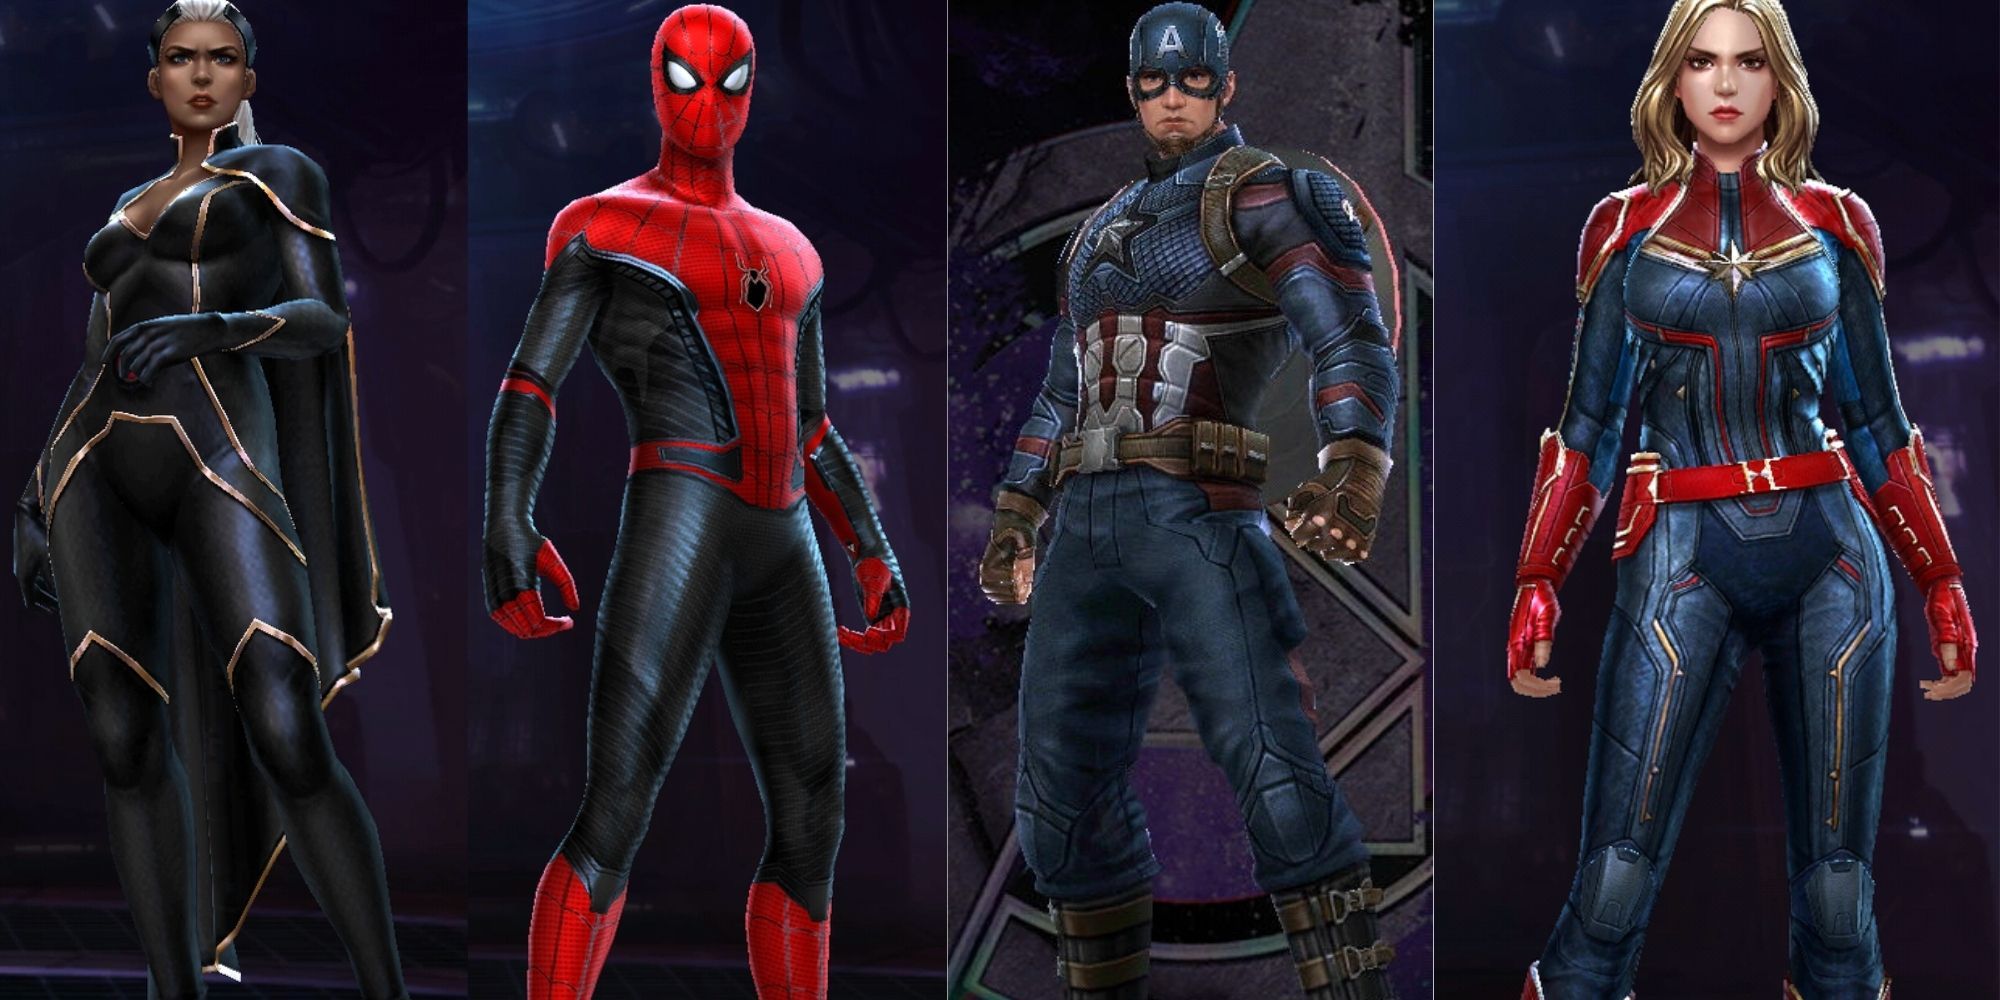 Split image of Storm, Spider-Man, Captain America, and Captain Marvel character models from Marvel Future Revolution.